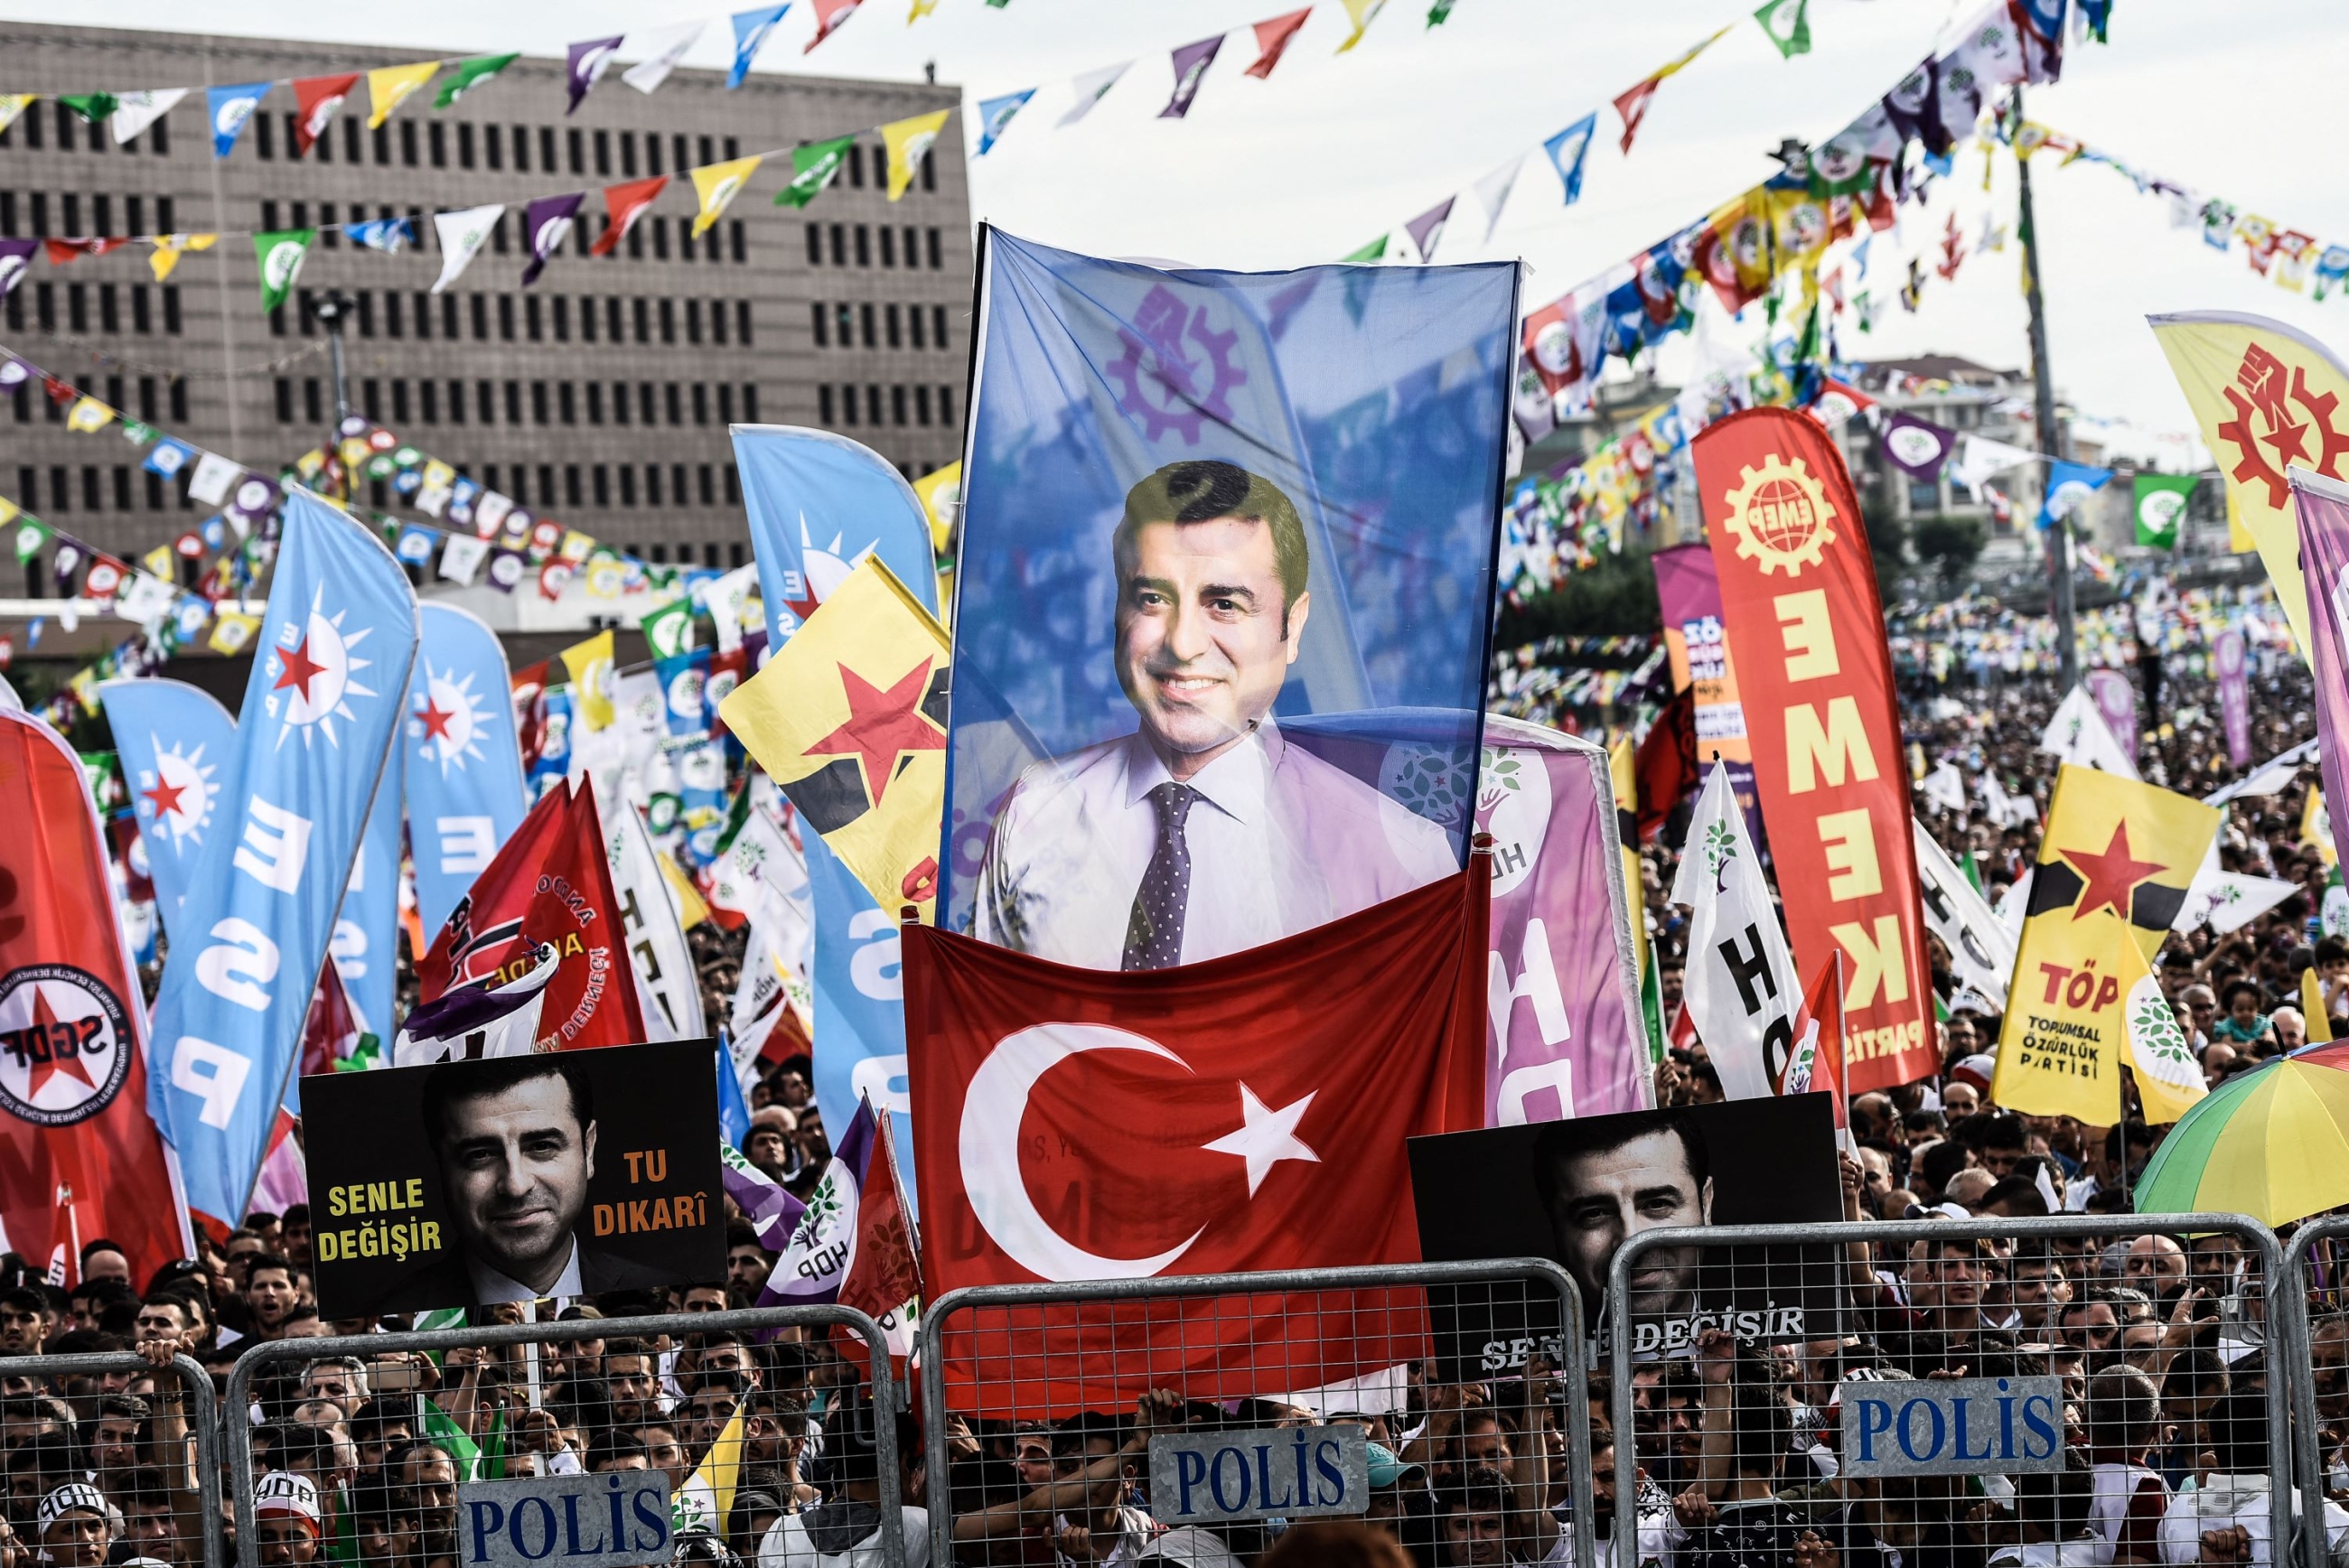 Supporters of imprisoned Selahattin Demirtas, presidential candidate of the HDP, hold HDP and other left-wing flags with picture of Demirtas during an election campaign in Istanbul on June 17, 2018 (AFP)